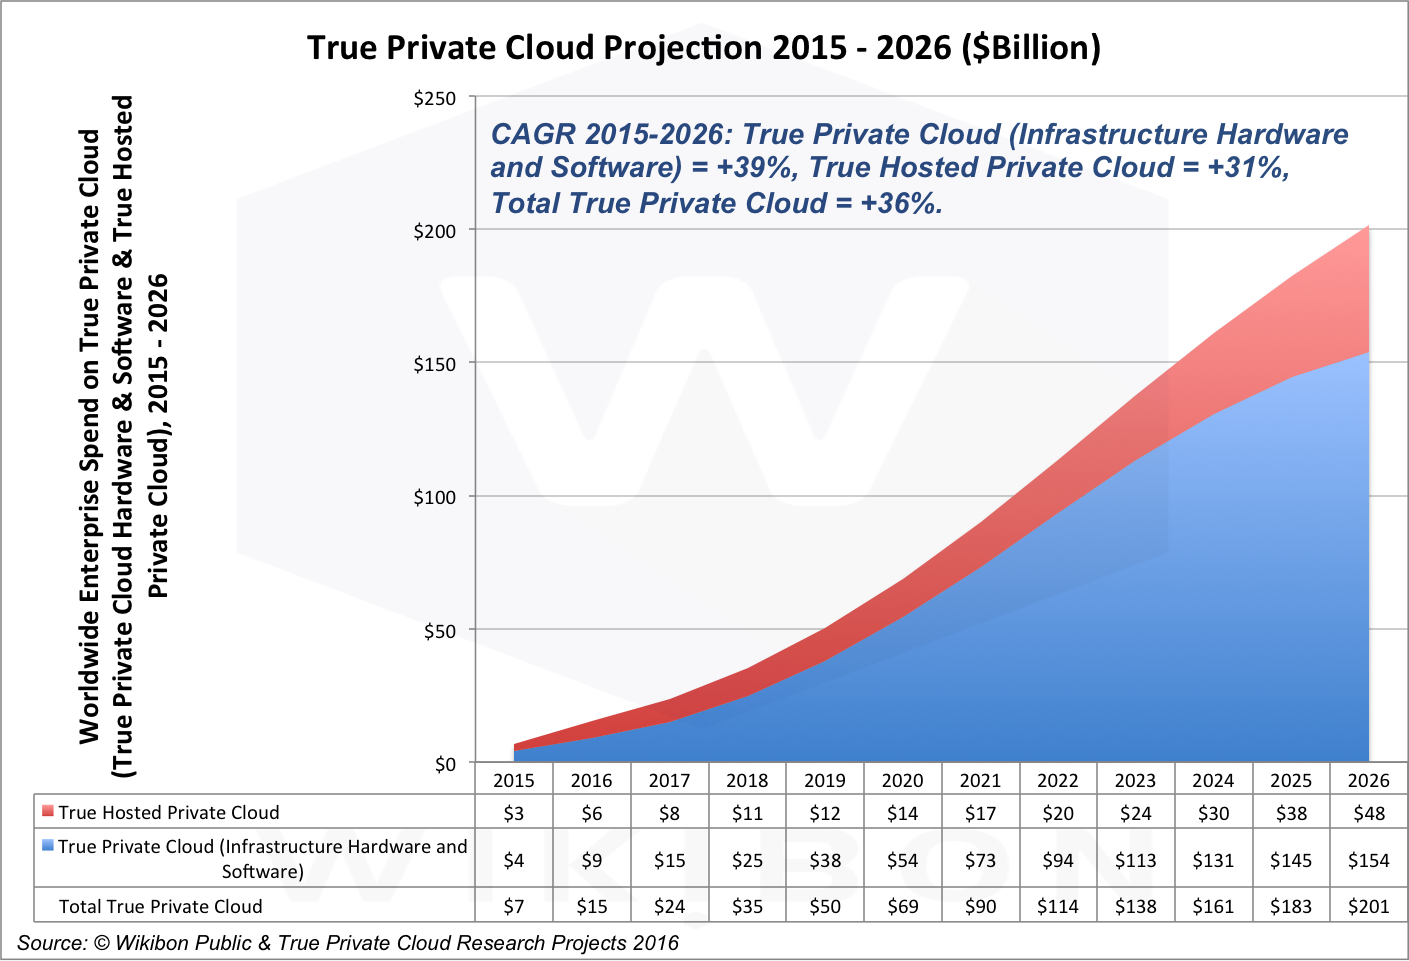 Figure 1 - Projected Enterprise Infrastructure Spend (Hardware, Software & Operational Staffing) from 2015 to 2026, $Billions. Source: © Wikibon Public & True Private Cloud Research, 2016.